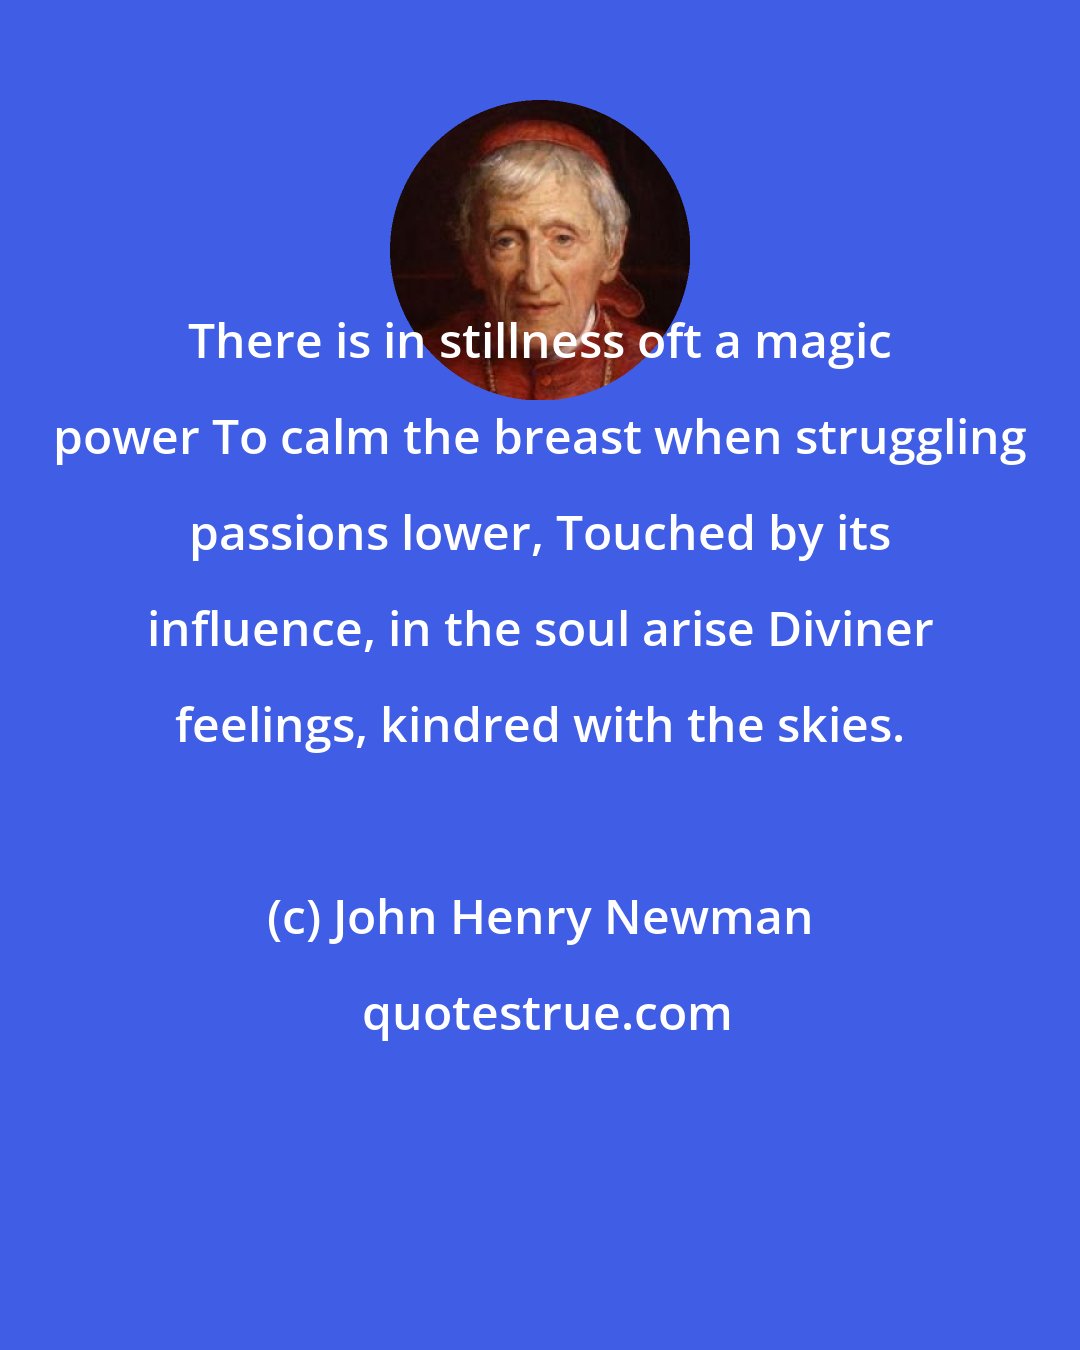 John Henry Newman: There is in stillness oft a magic power To calm the breast when struggling passions lower, Touched by its influence, in the soul arise Diviner feelings, kindred with the skies.